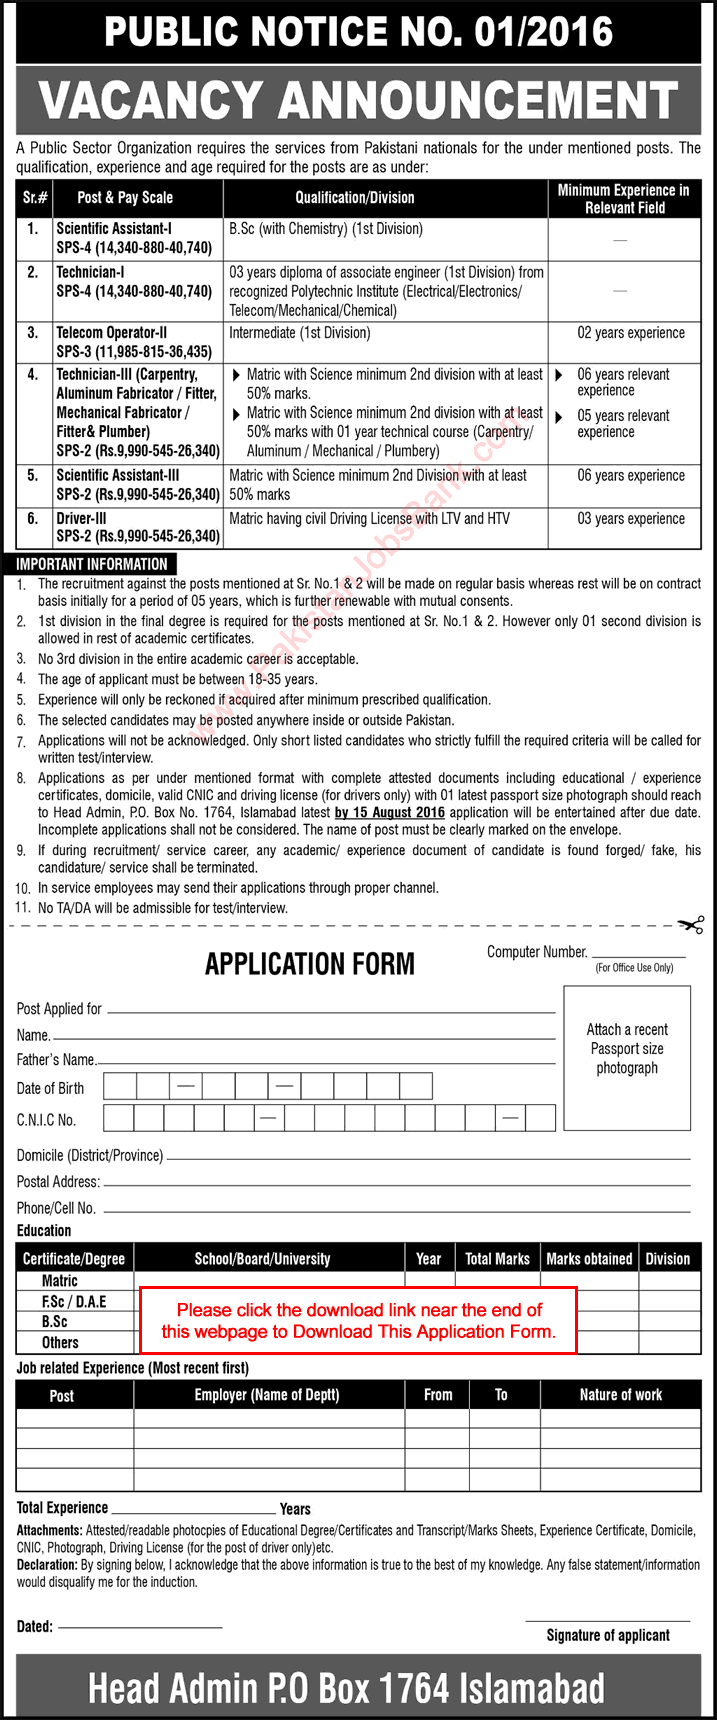 PO Box 1764 Islamabad Jobs 2016 July / August Application Form PINSTECH Technicians & Others Latest